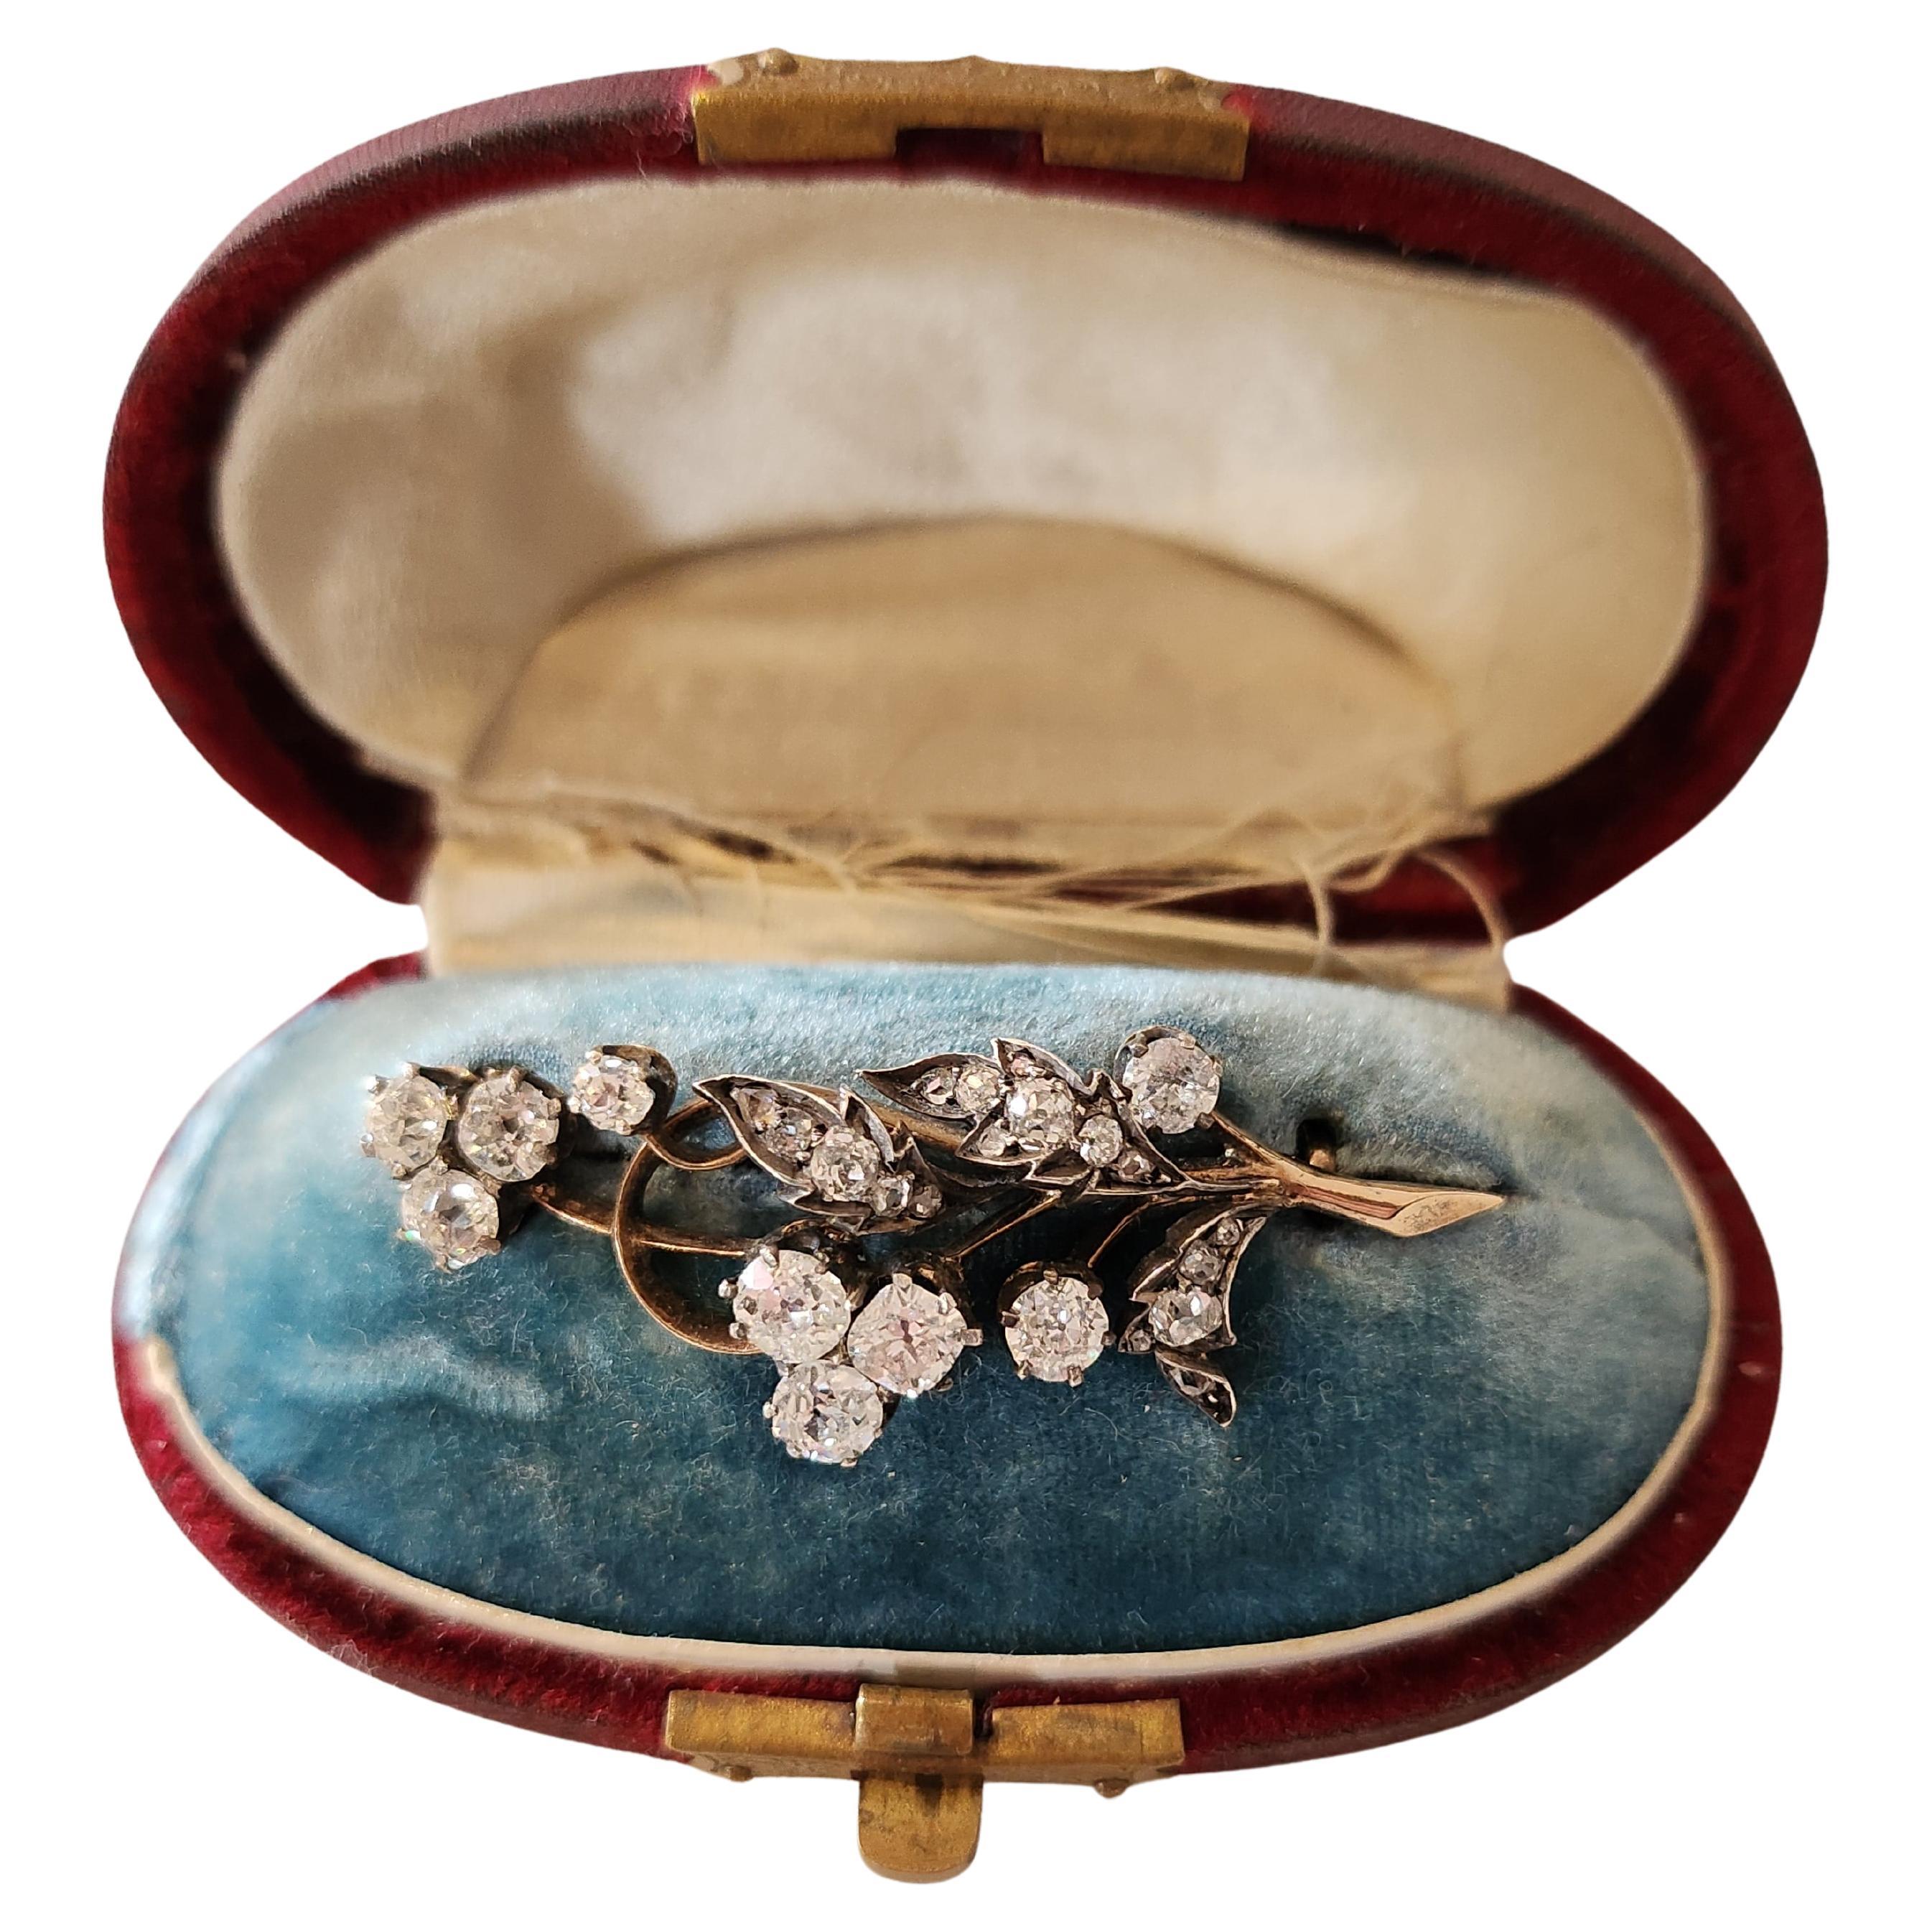 Antique 14k gold brooch on tremblant designe with old mine cut diamonds H colour white vs clearity and estimate diamond weight of 2.60 carats brooch was made in moscow 1890.c diring the tsarist russian era hall marked 56 imperial russian gold